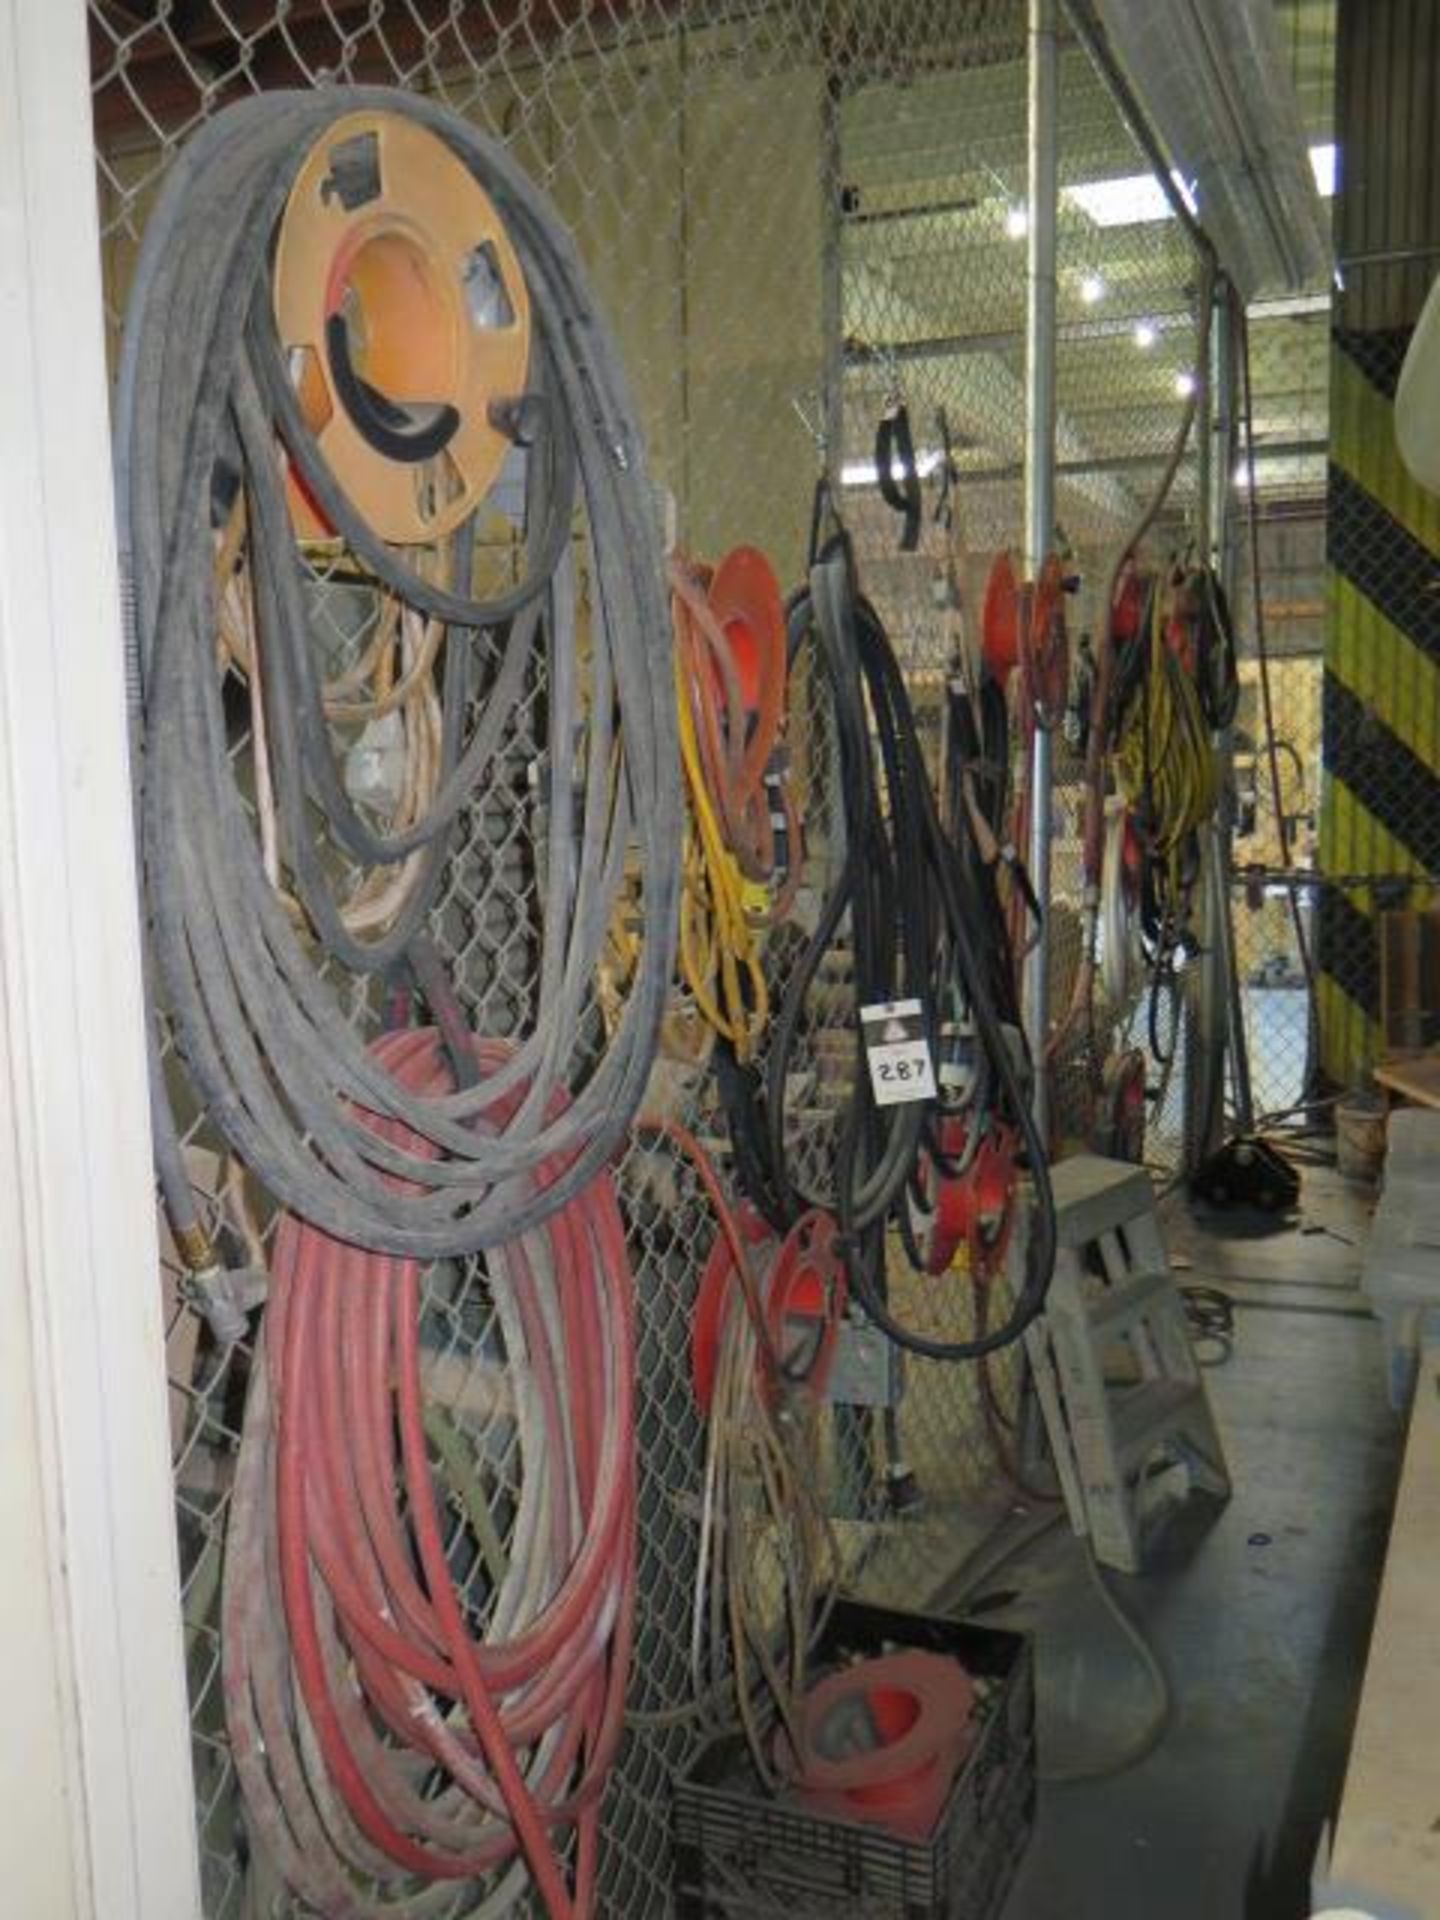 Electrical Cords and Air Hoses (SOLD AS-IS - NO WARRANTY)